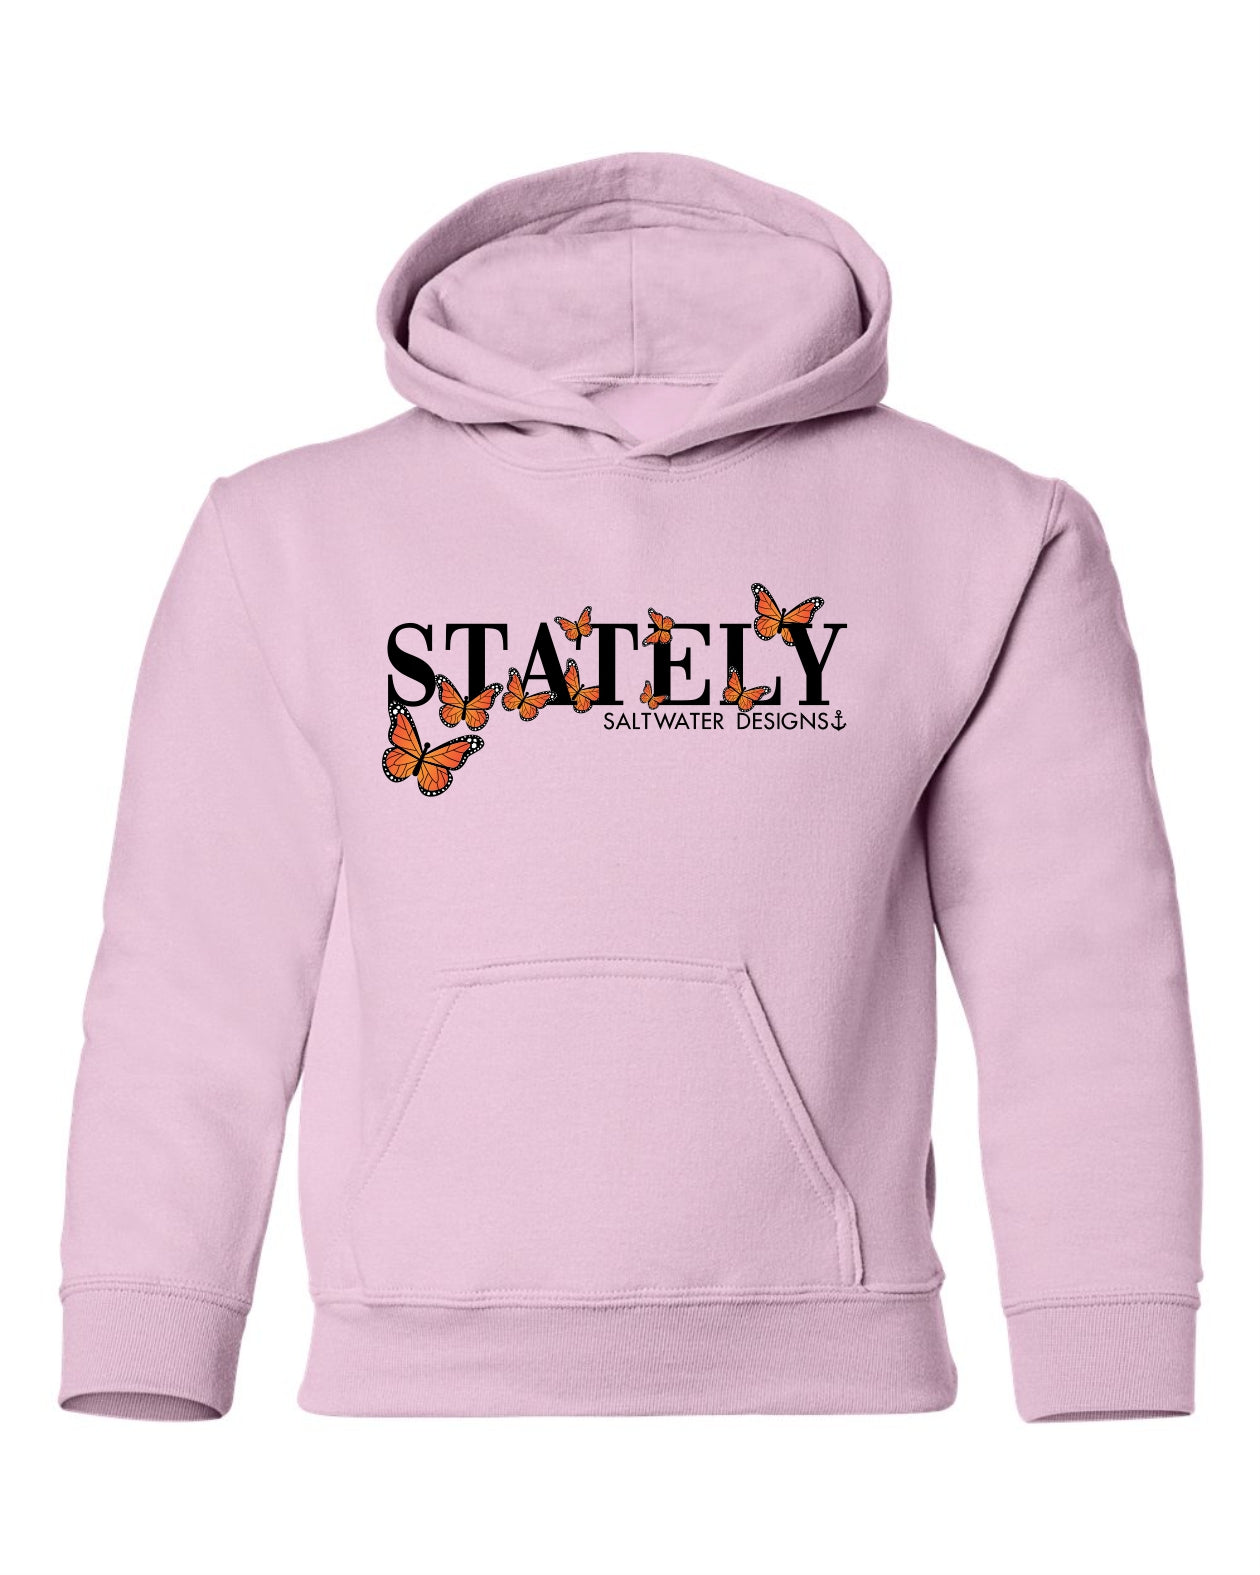 "Stately" Butterflies Youth Hoodie